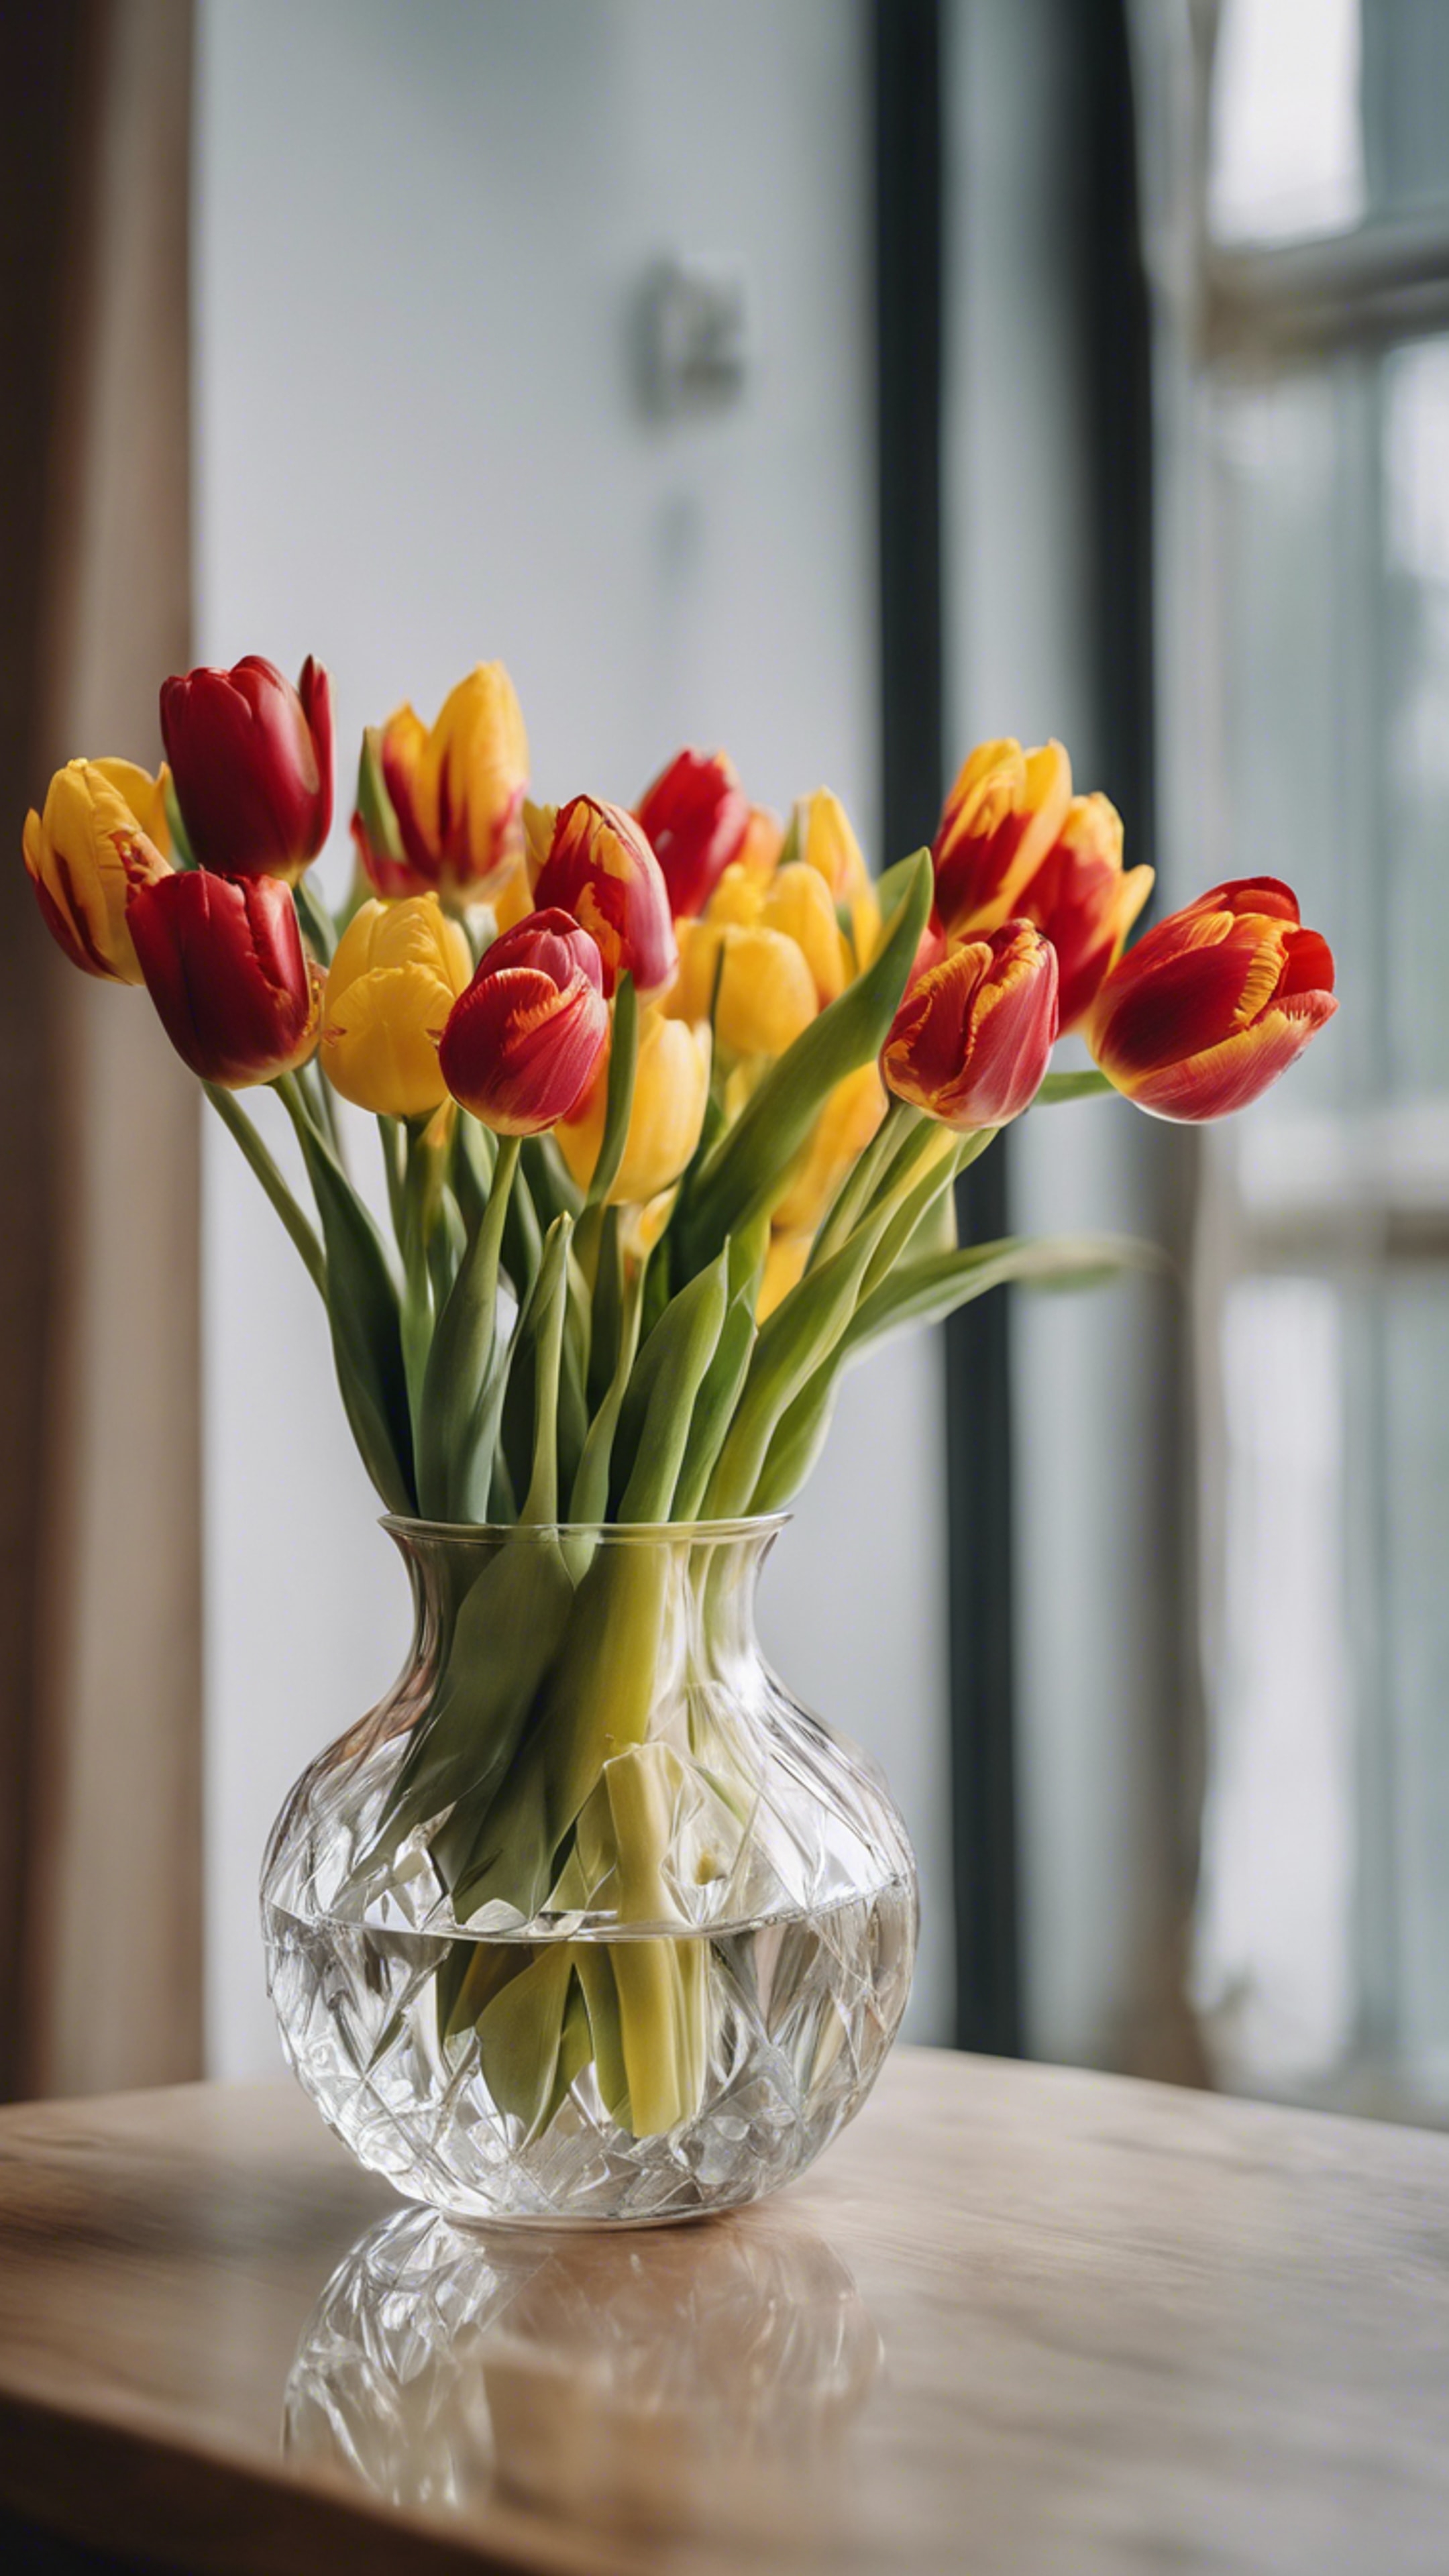 A bunch of fresh red and yellow tulips resting in a crystal clear vase. Tapetai[770eab0b3cc545c1af9b]